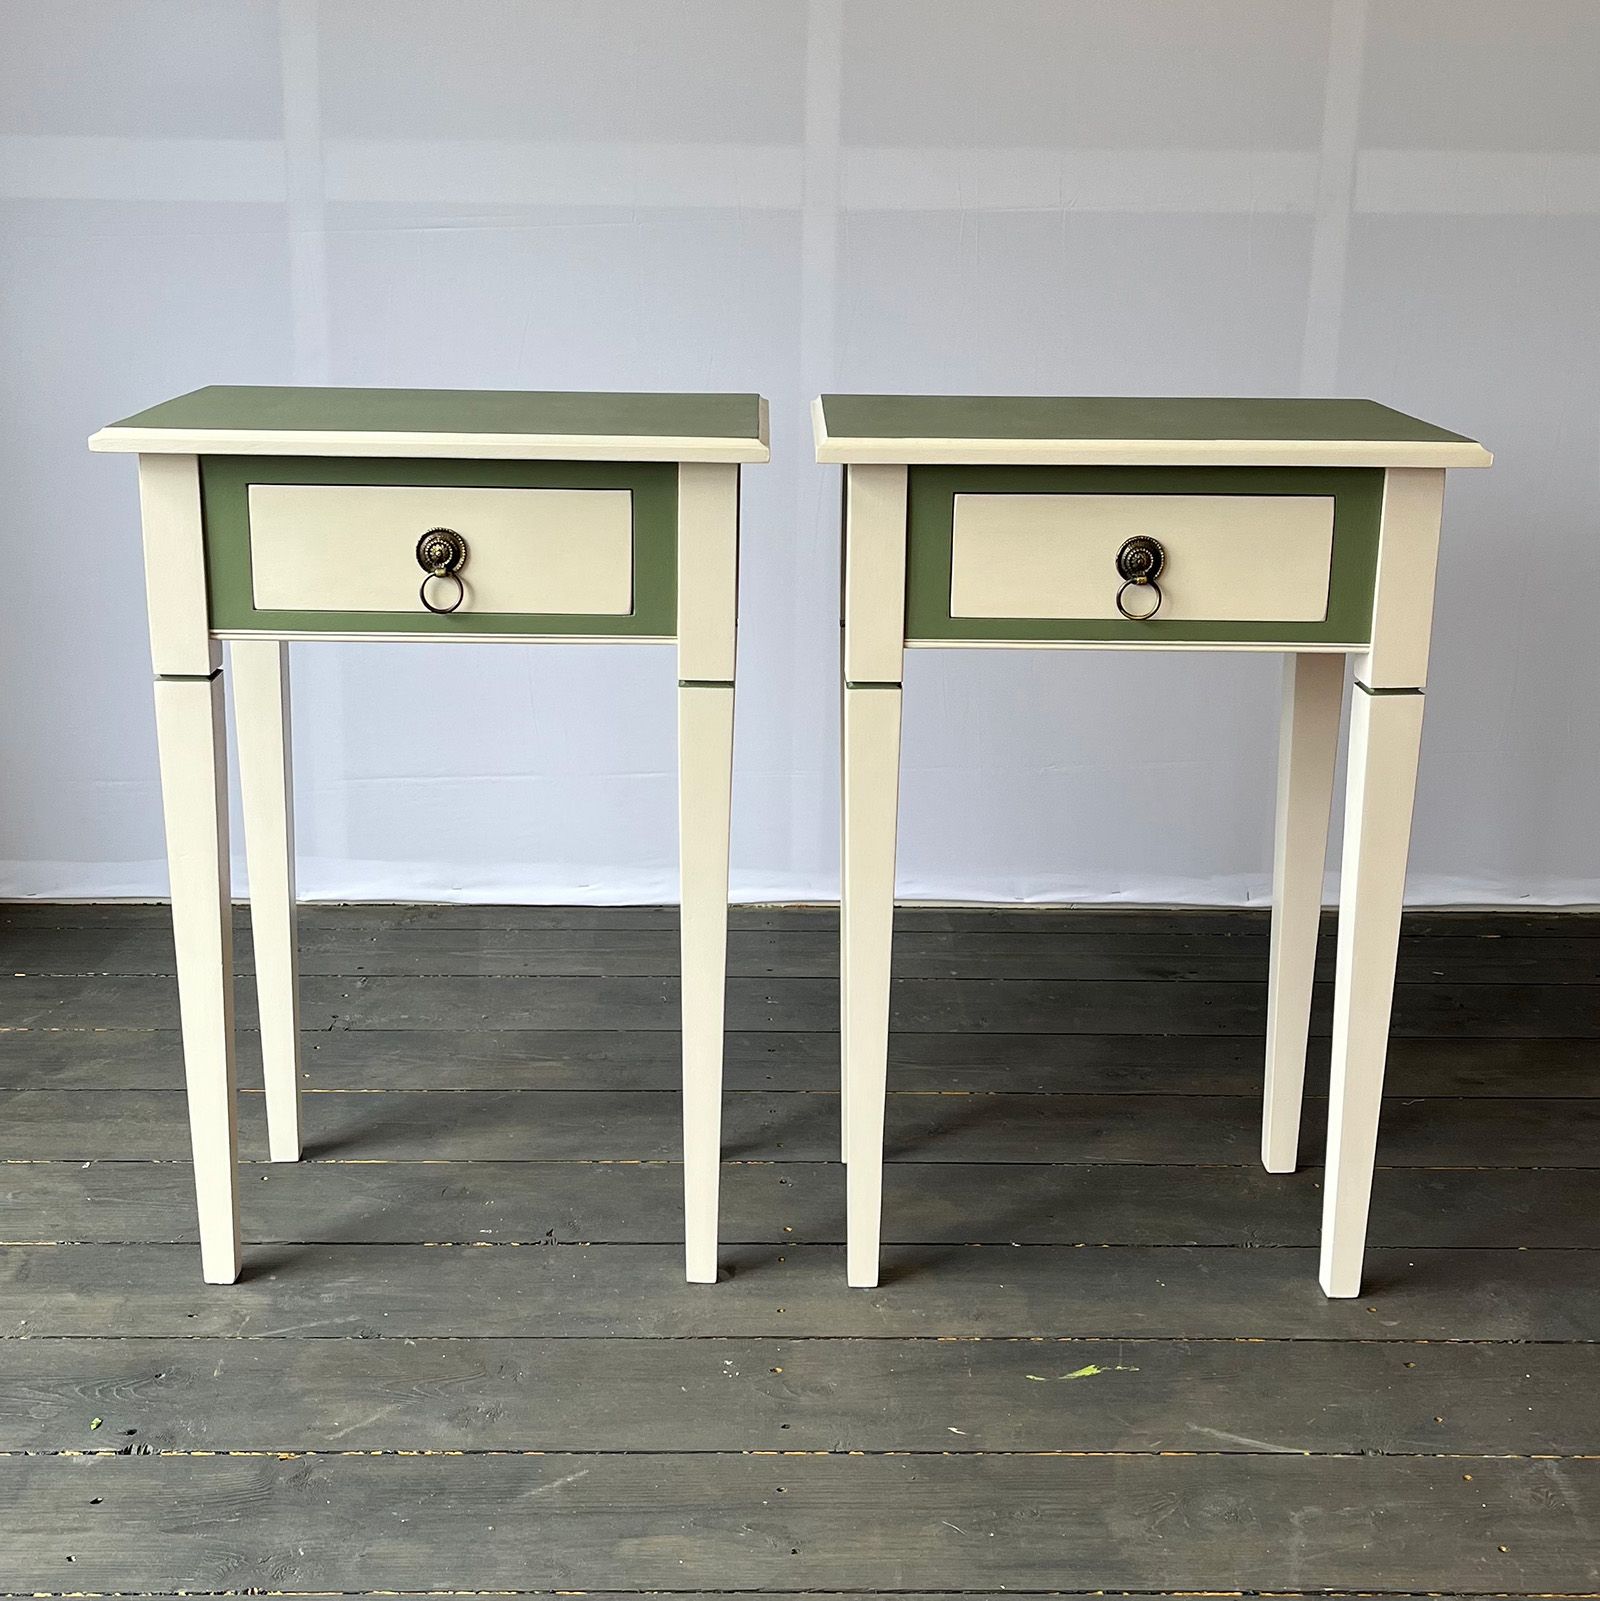 A pair of upcycled bedside tables in Helen's Edinburgh Studio